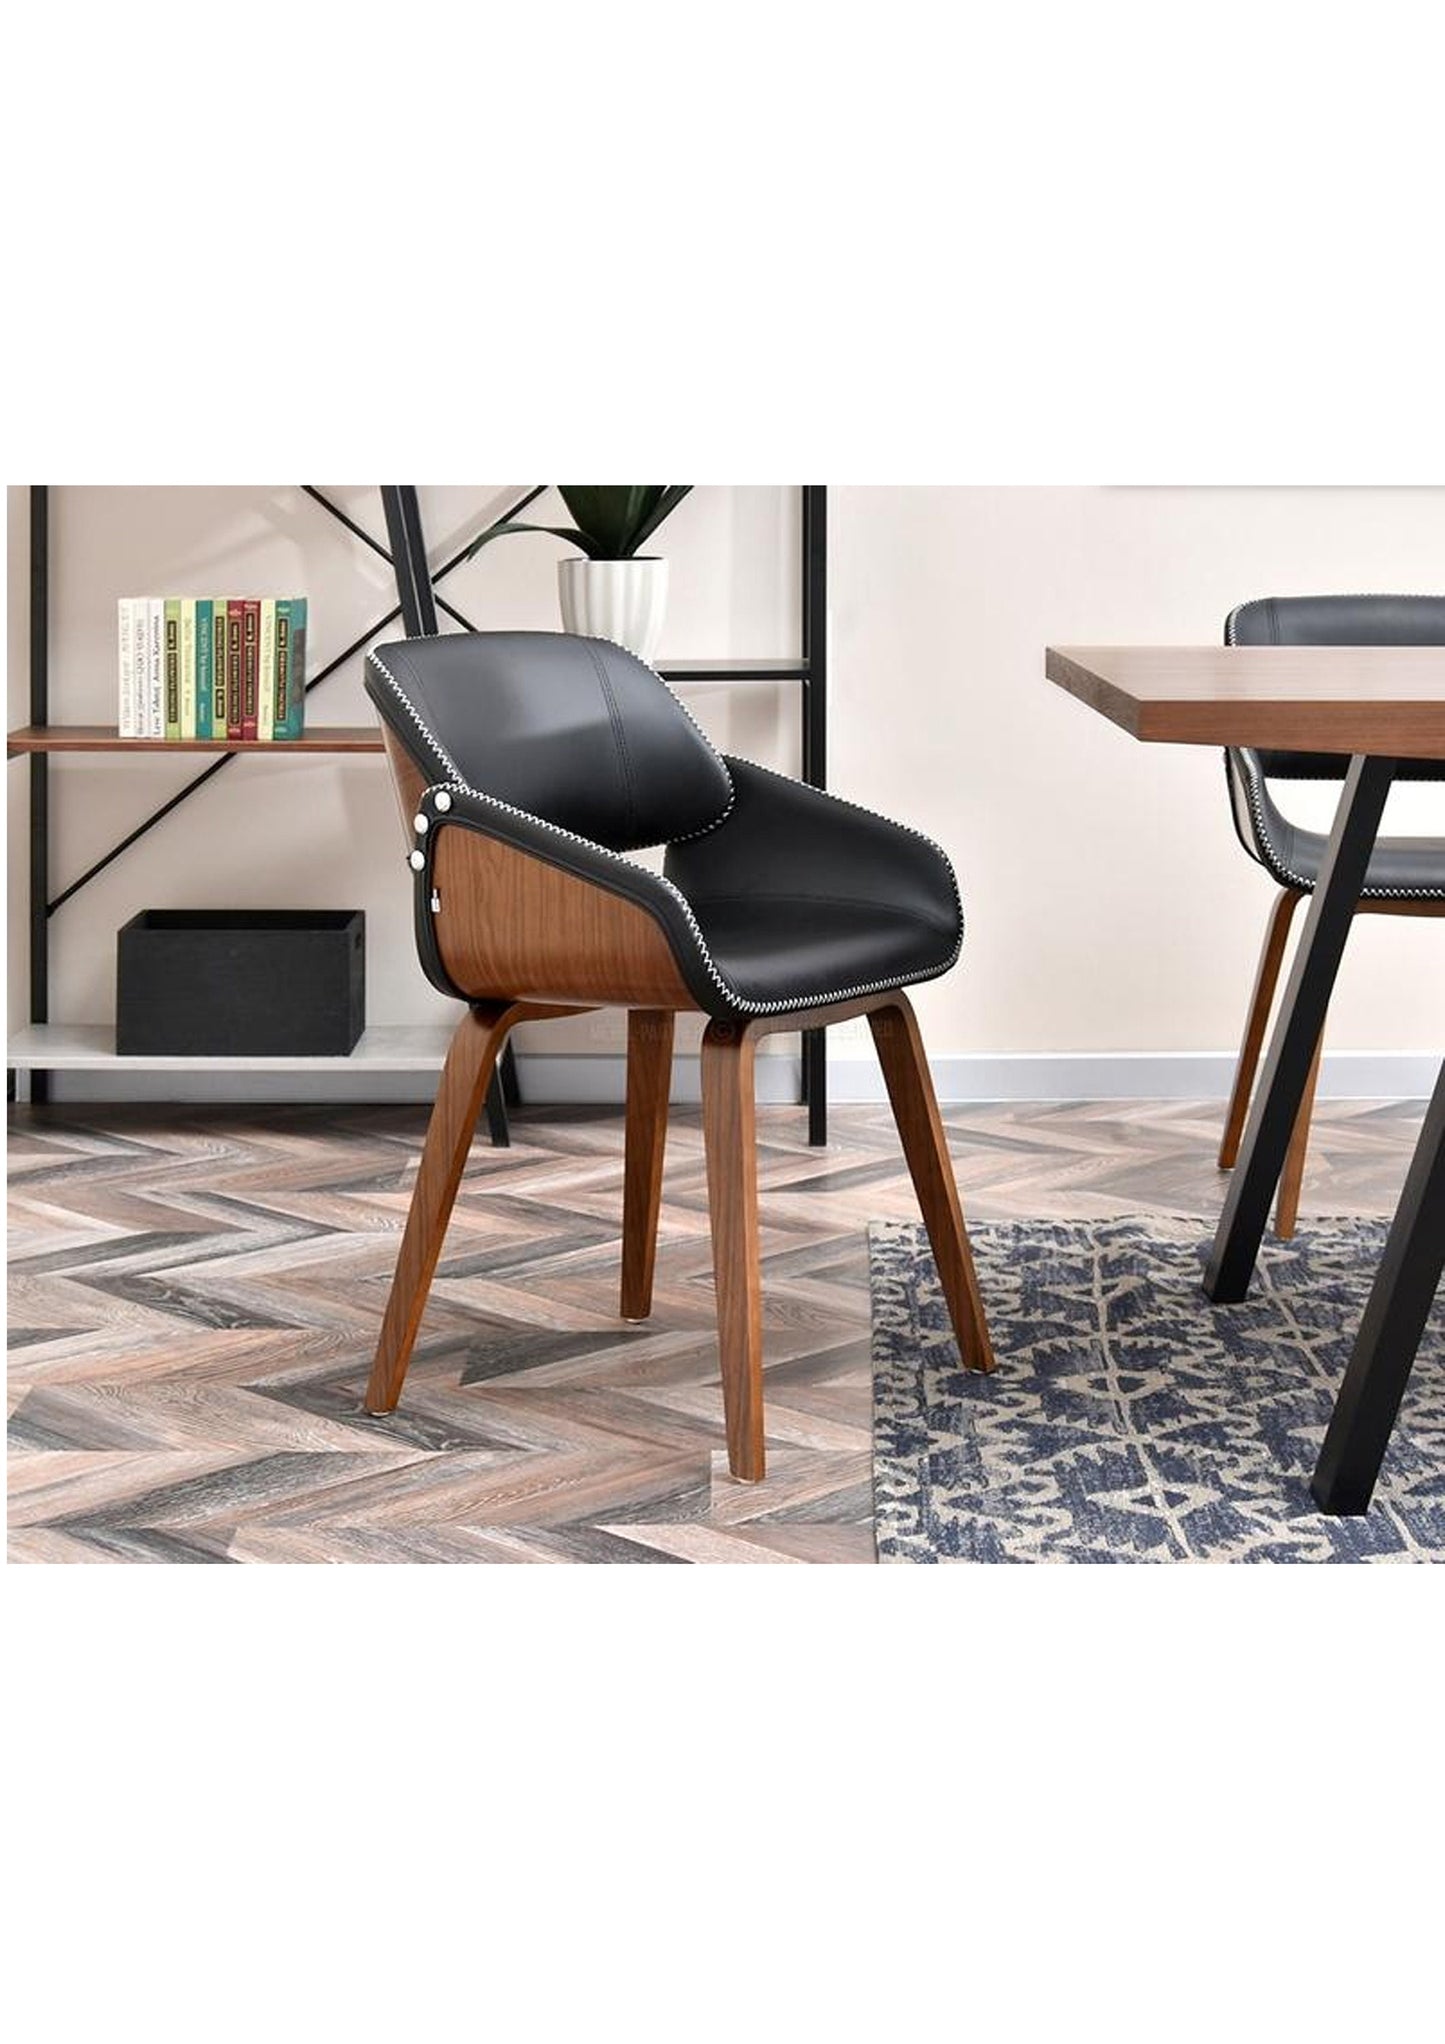 Designer Chair Retro Scandi Dining Desk Office chair in faux leather and walnut wood